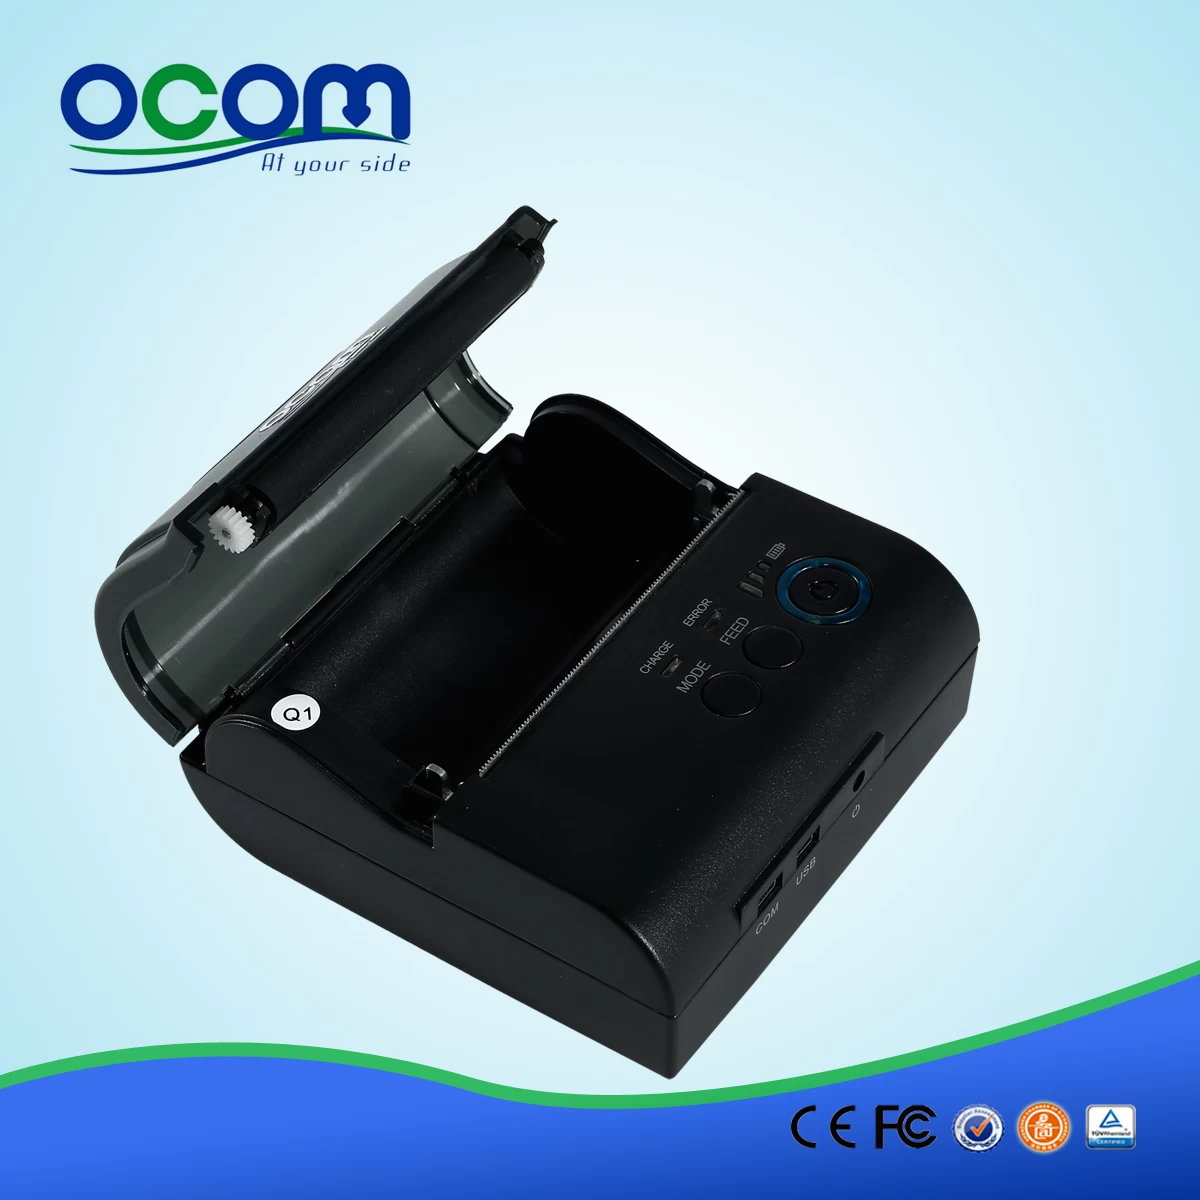 Handheld 80mm wifi receipt Printer for Android (OCPP-M082)